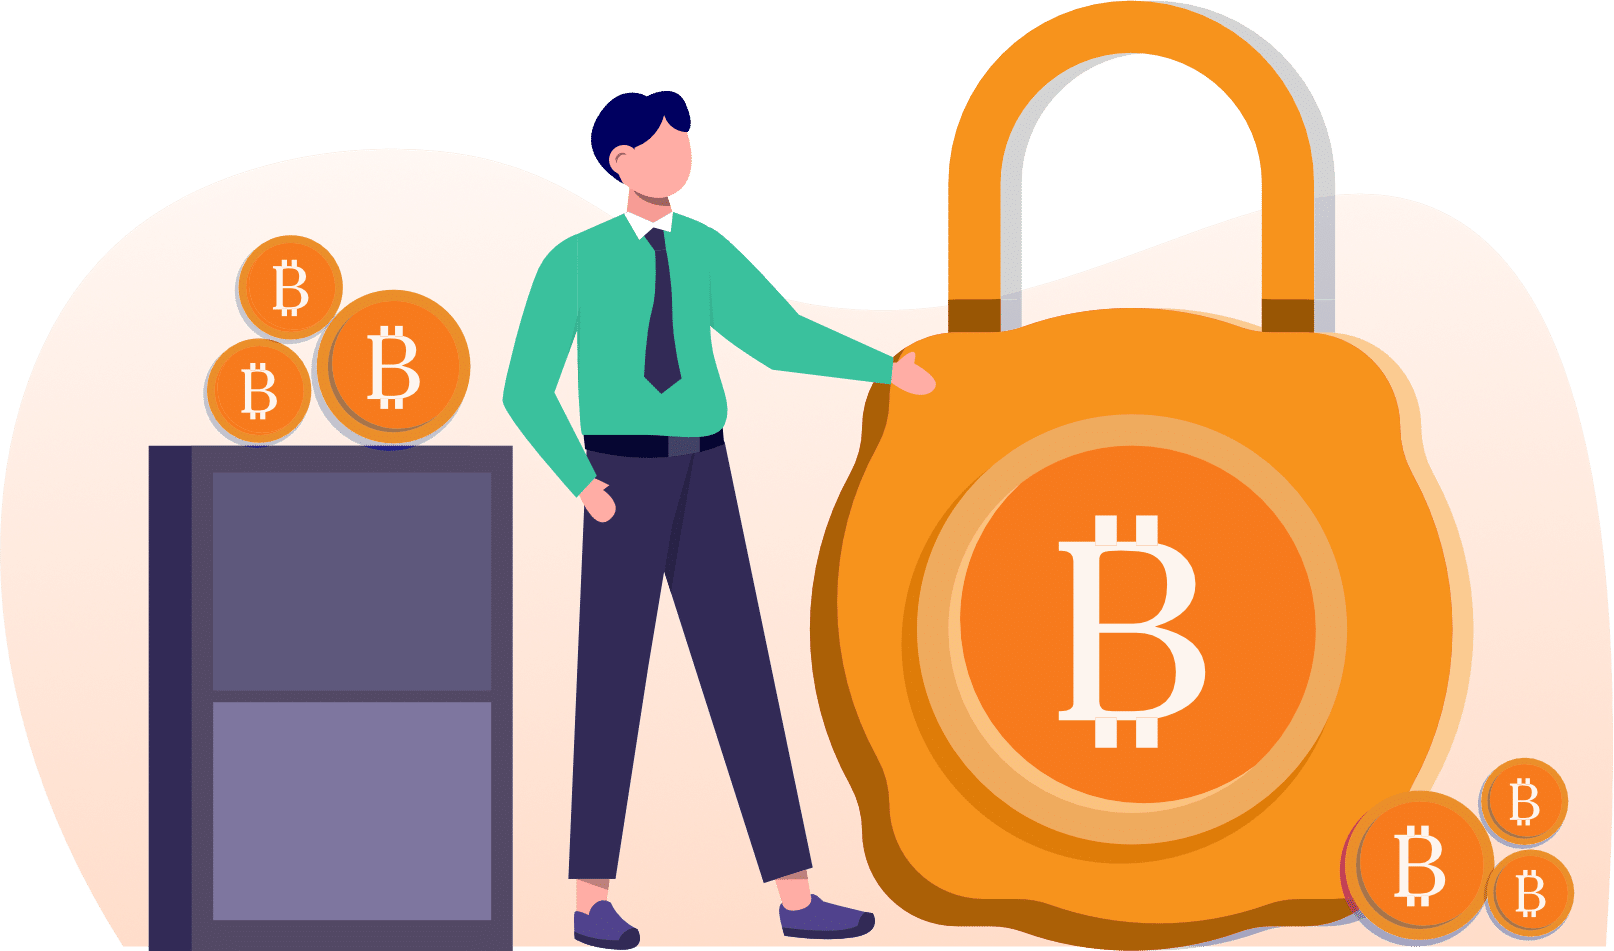 Illustration of man standing next to a lock with Bitcoin on front. Cryptocurrency secure transactions concept